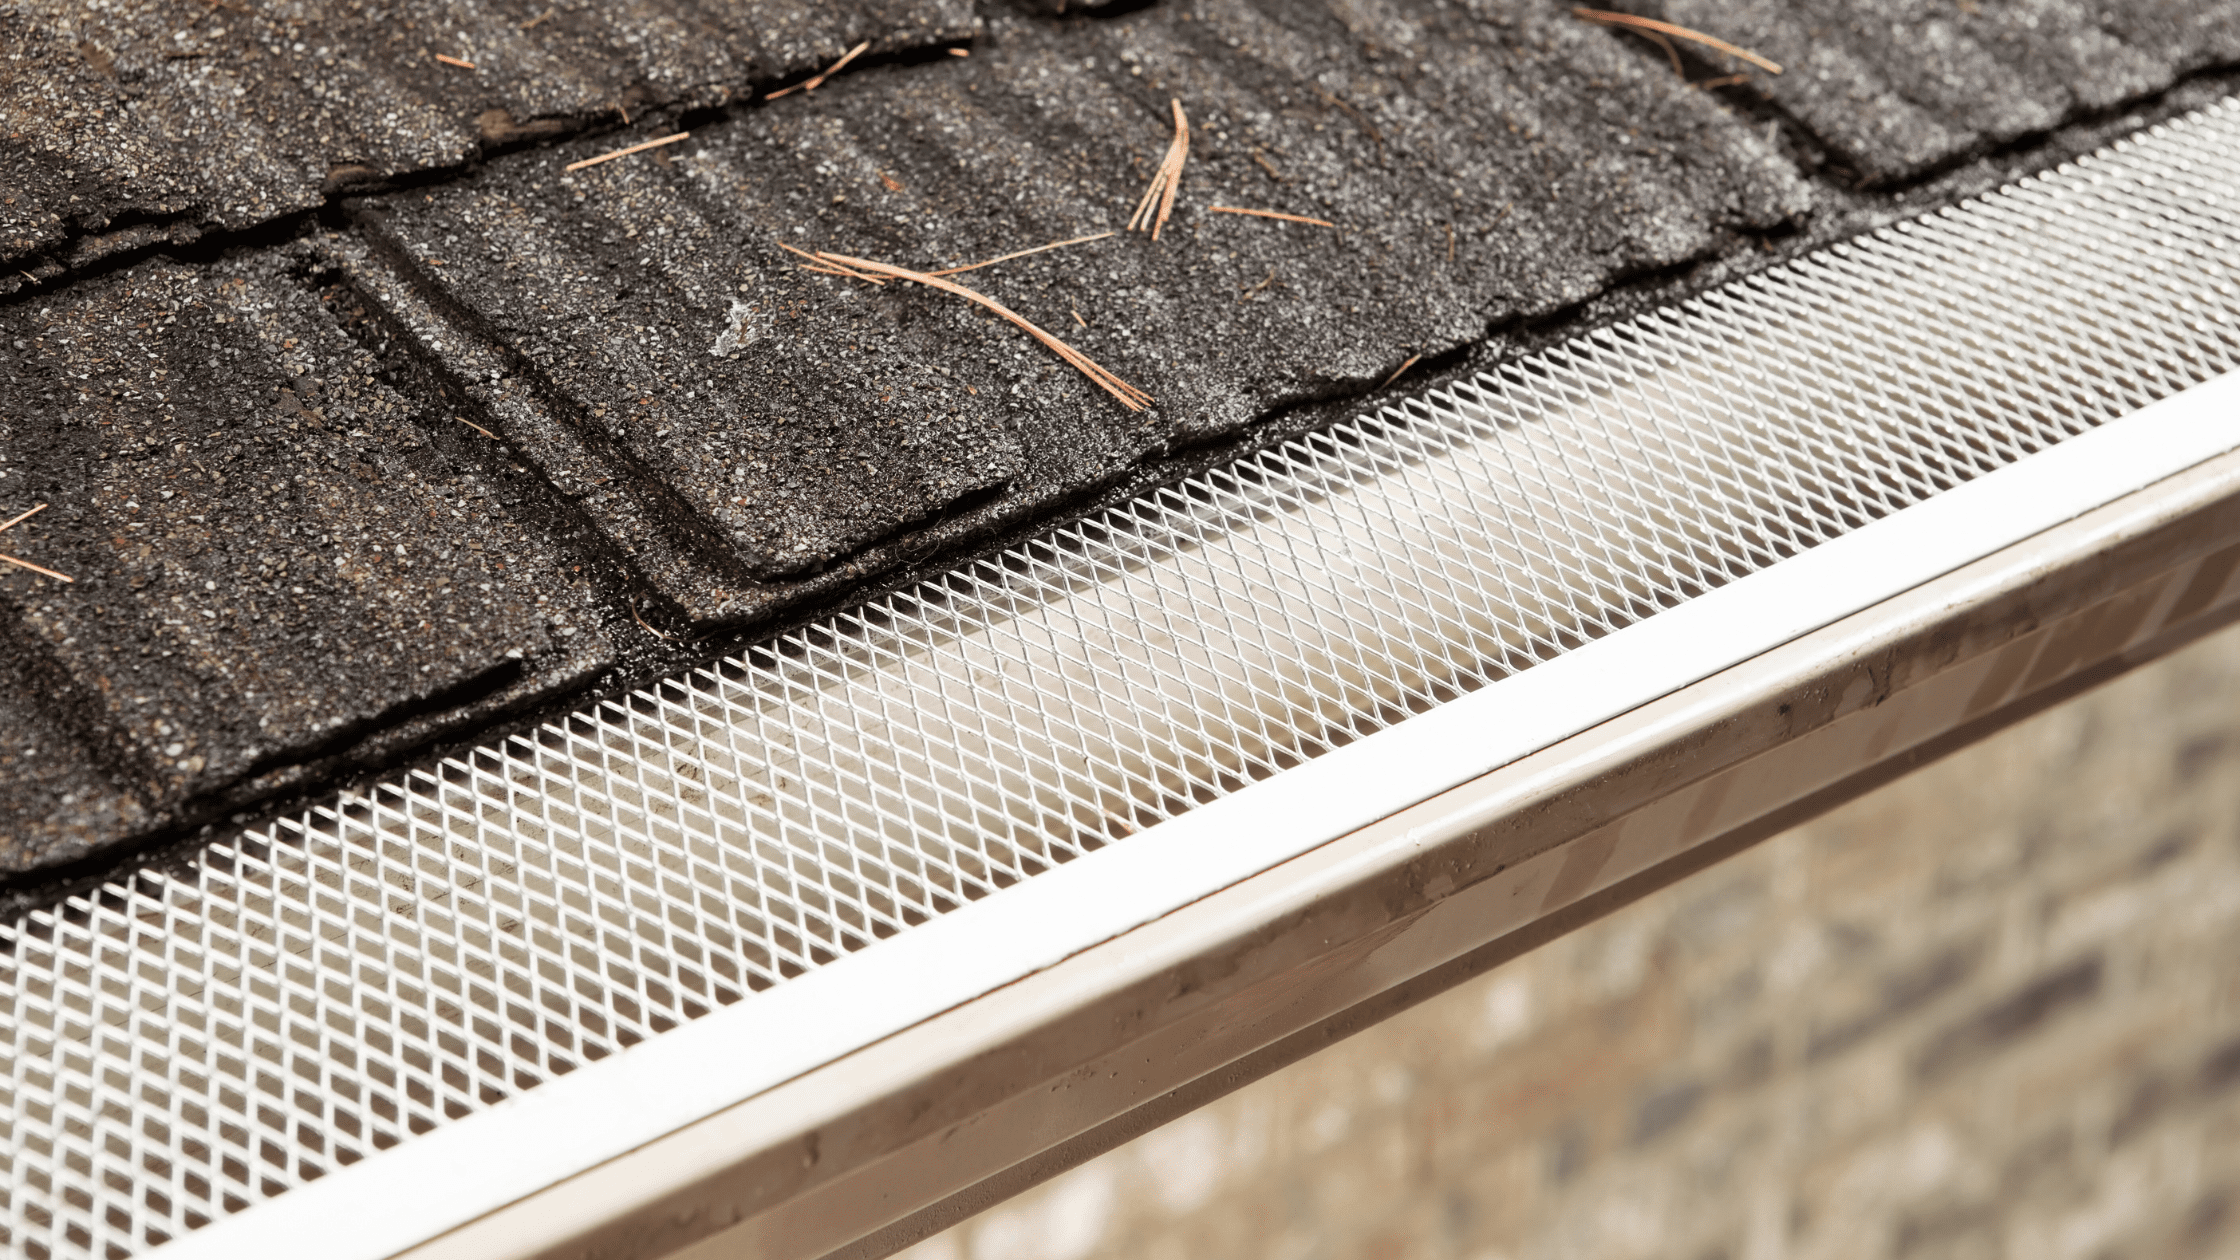 What Is The Best Type of Gutter Guard?